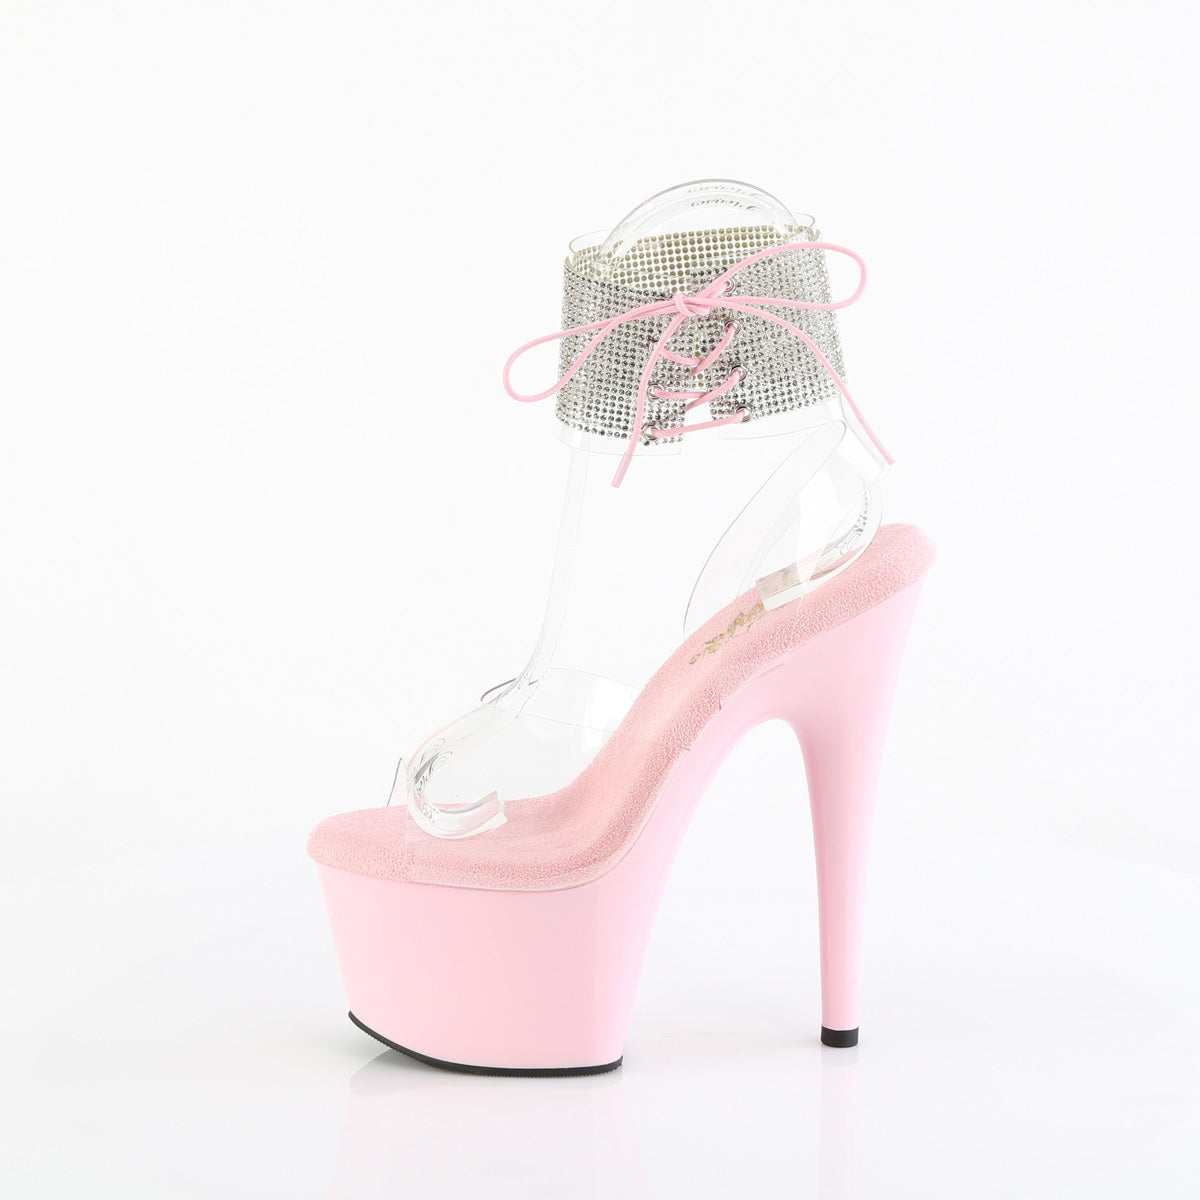 ADORE-791-2RS Pleaser Clear/B Pink Platform Shoes [Exotic Dance Shoes]